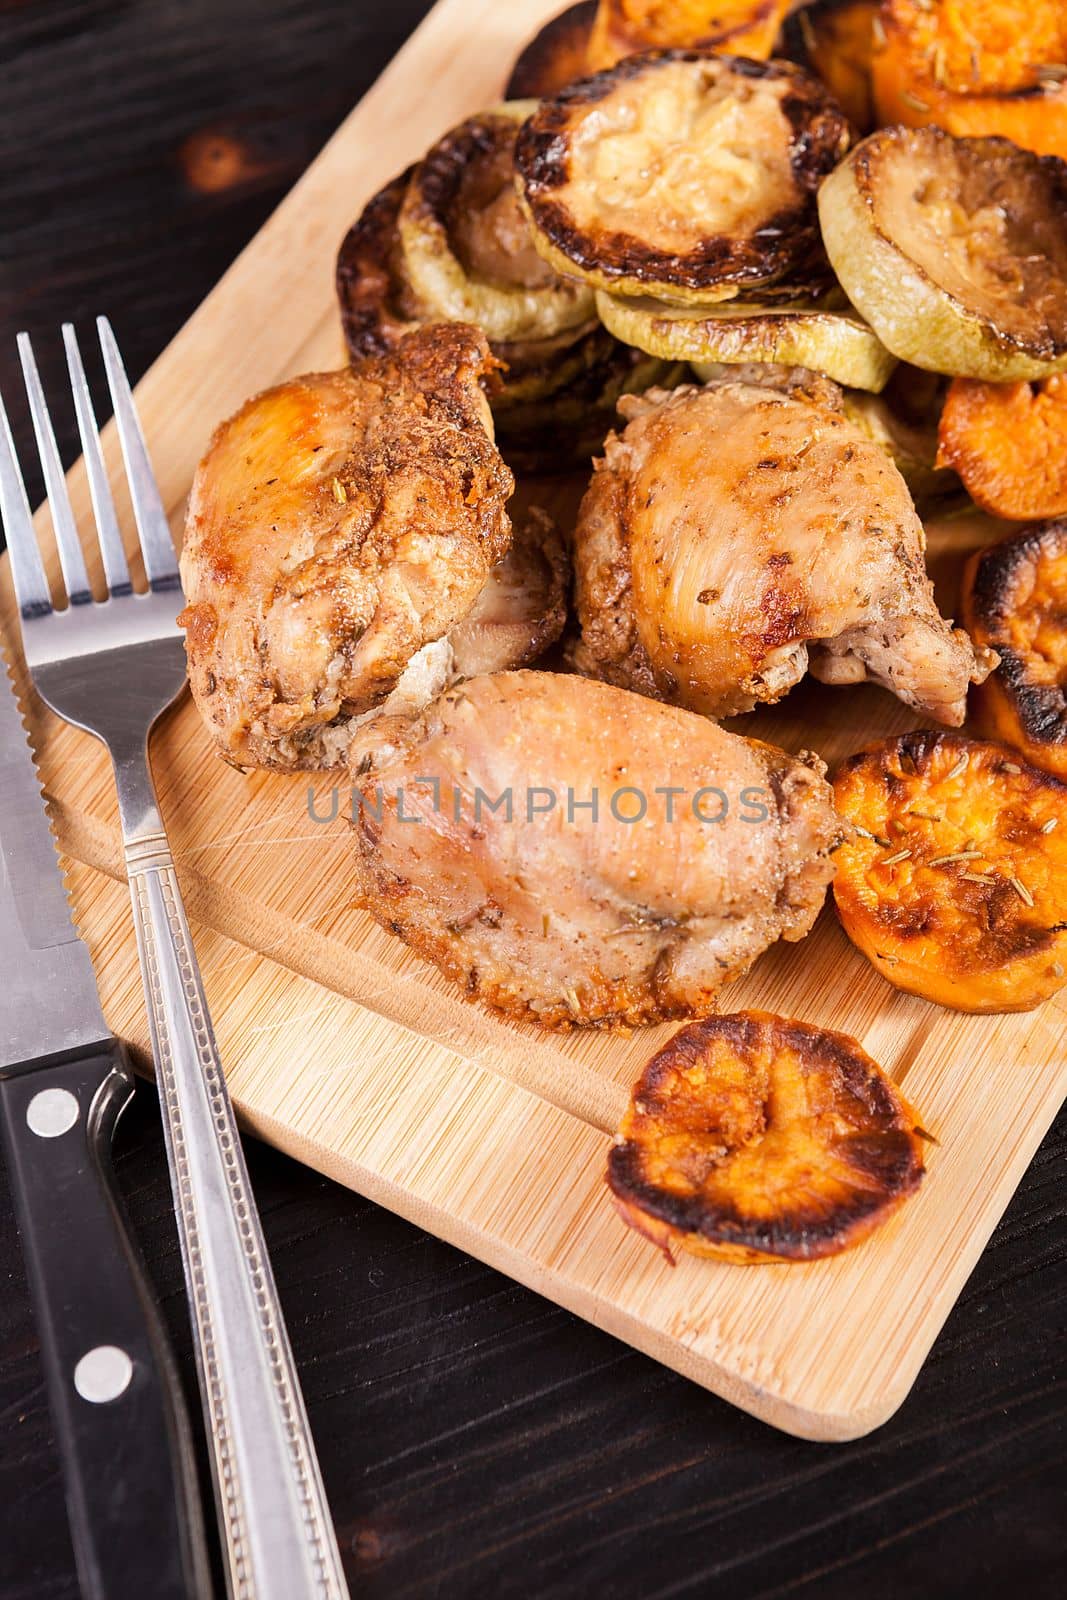 Wooden plate with fried chicken by DCStudio